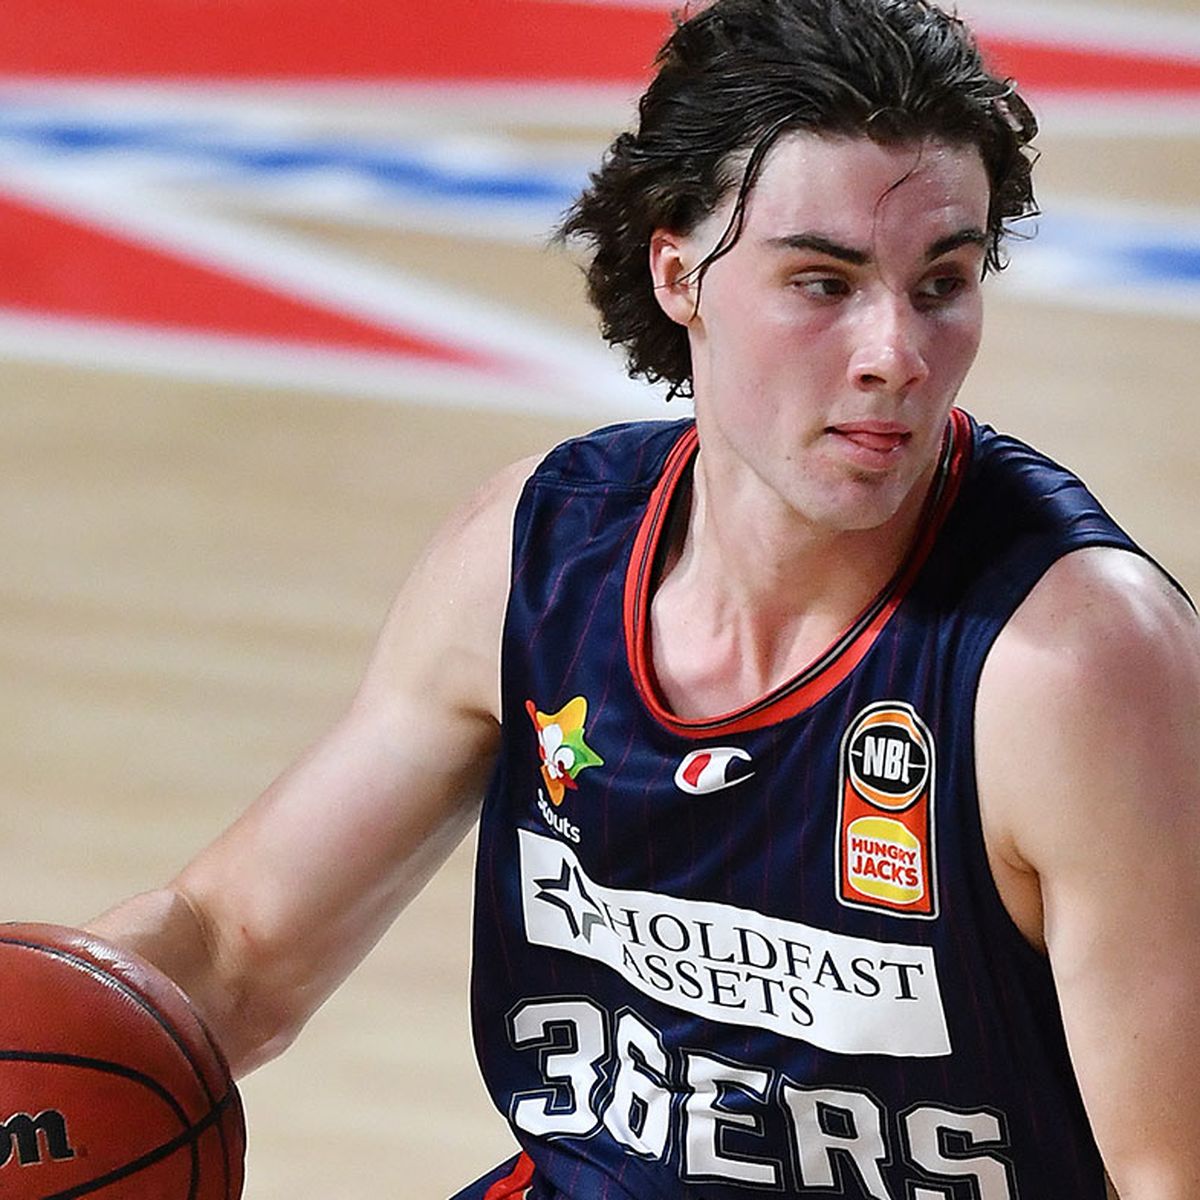 Young NBL star Josh Giddey picked sixth in the NBA draft by the